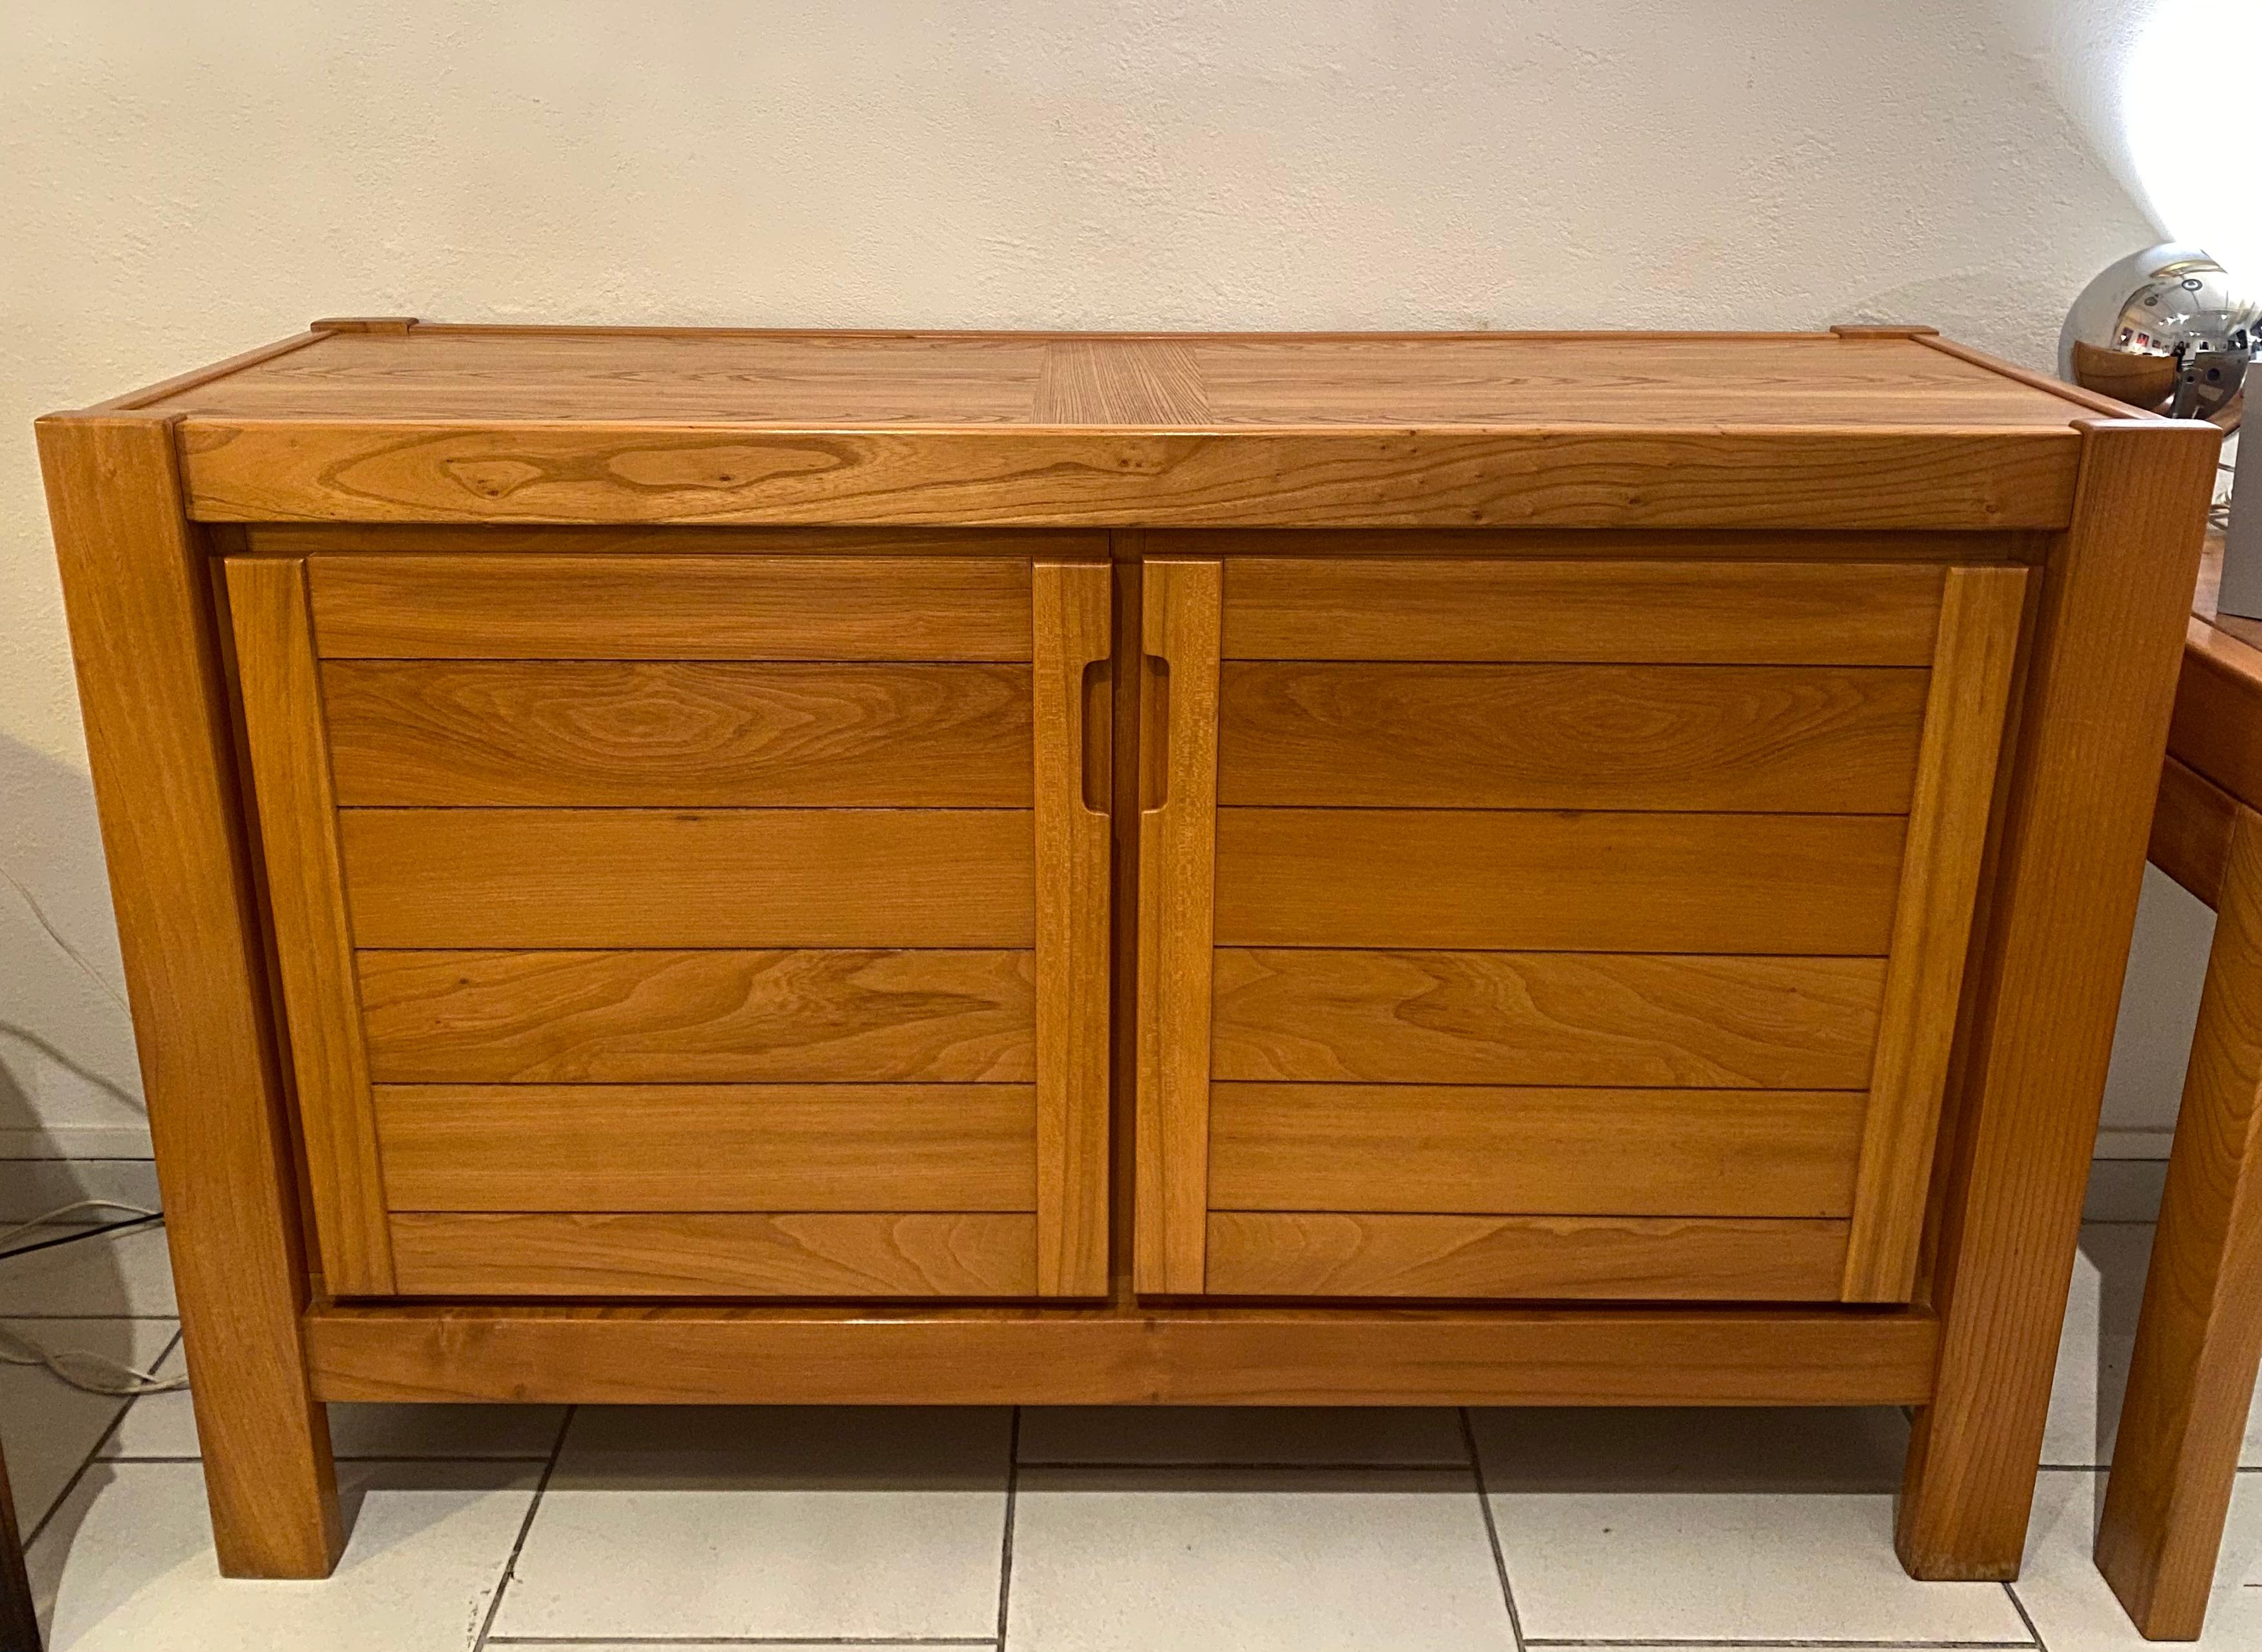 Solid elm sideboard - Maison Regain (Designer Pierre Chapo)
Solid elm sideboard
2 doors / 4 interior shelves with 1 small drawer
Year 1971
Dimensions:
W 145 x h 95 x d 51
In perfect condition.